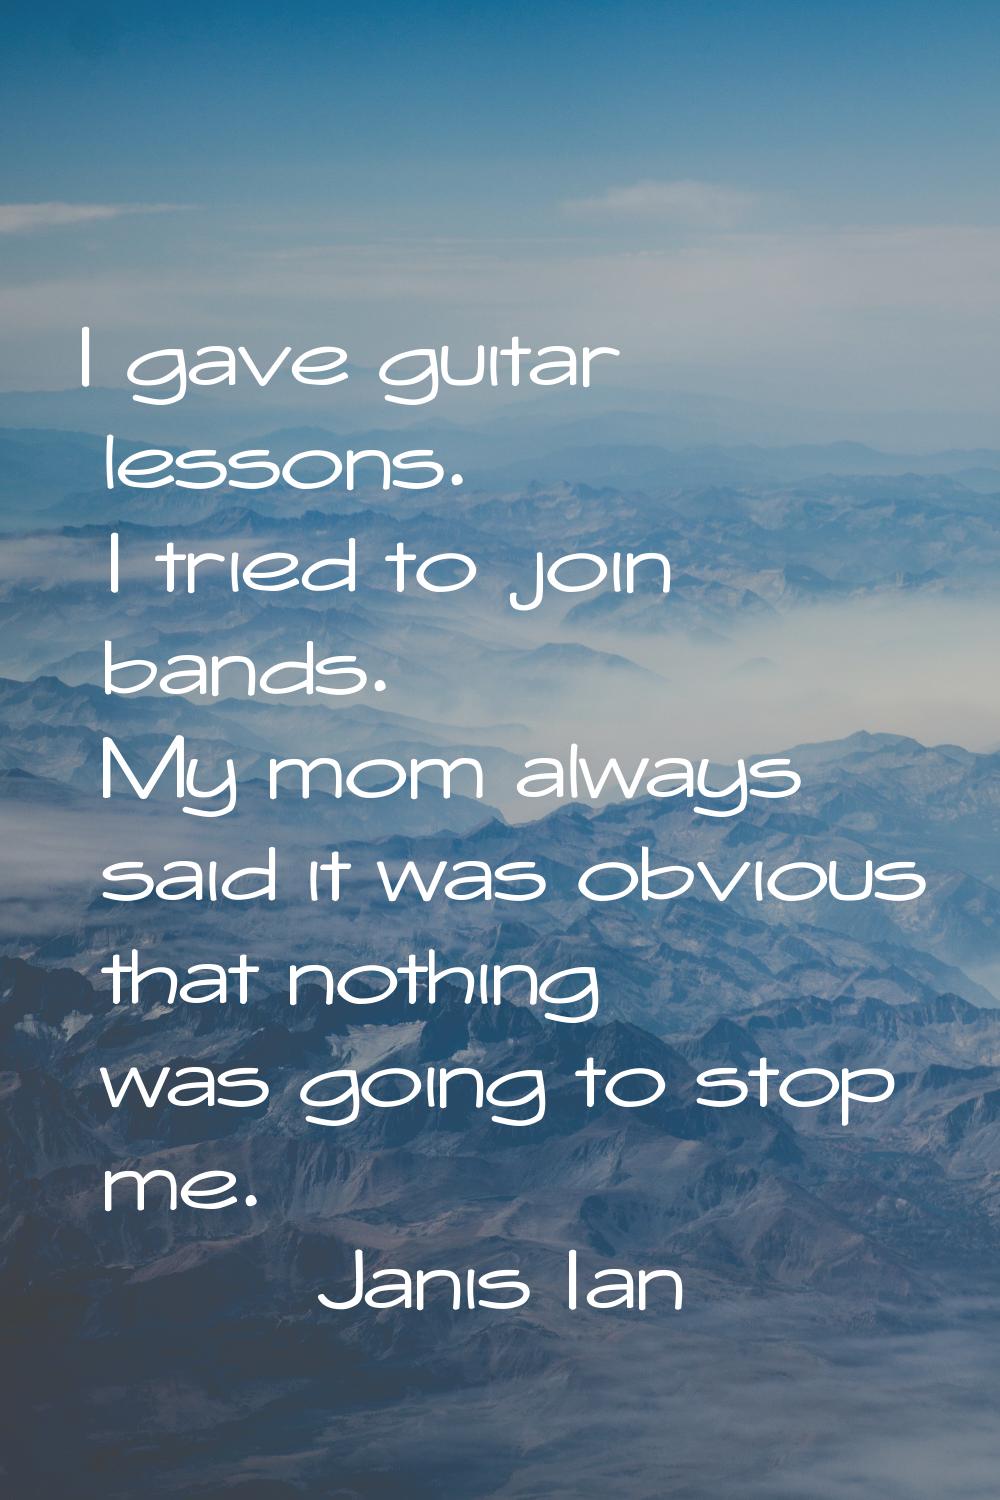 I gave guitar lessons. I tried to join bands. My mom always said it was obvious that nothing was go